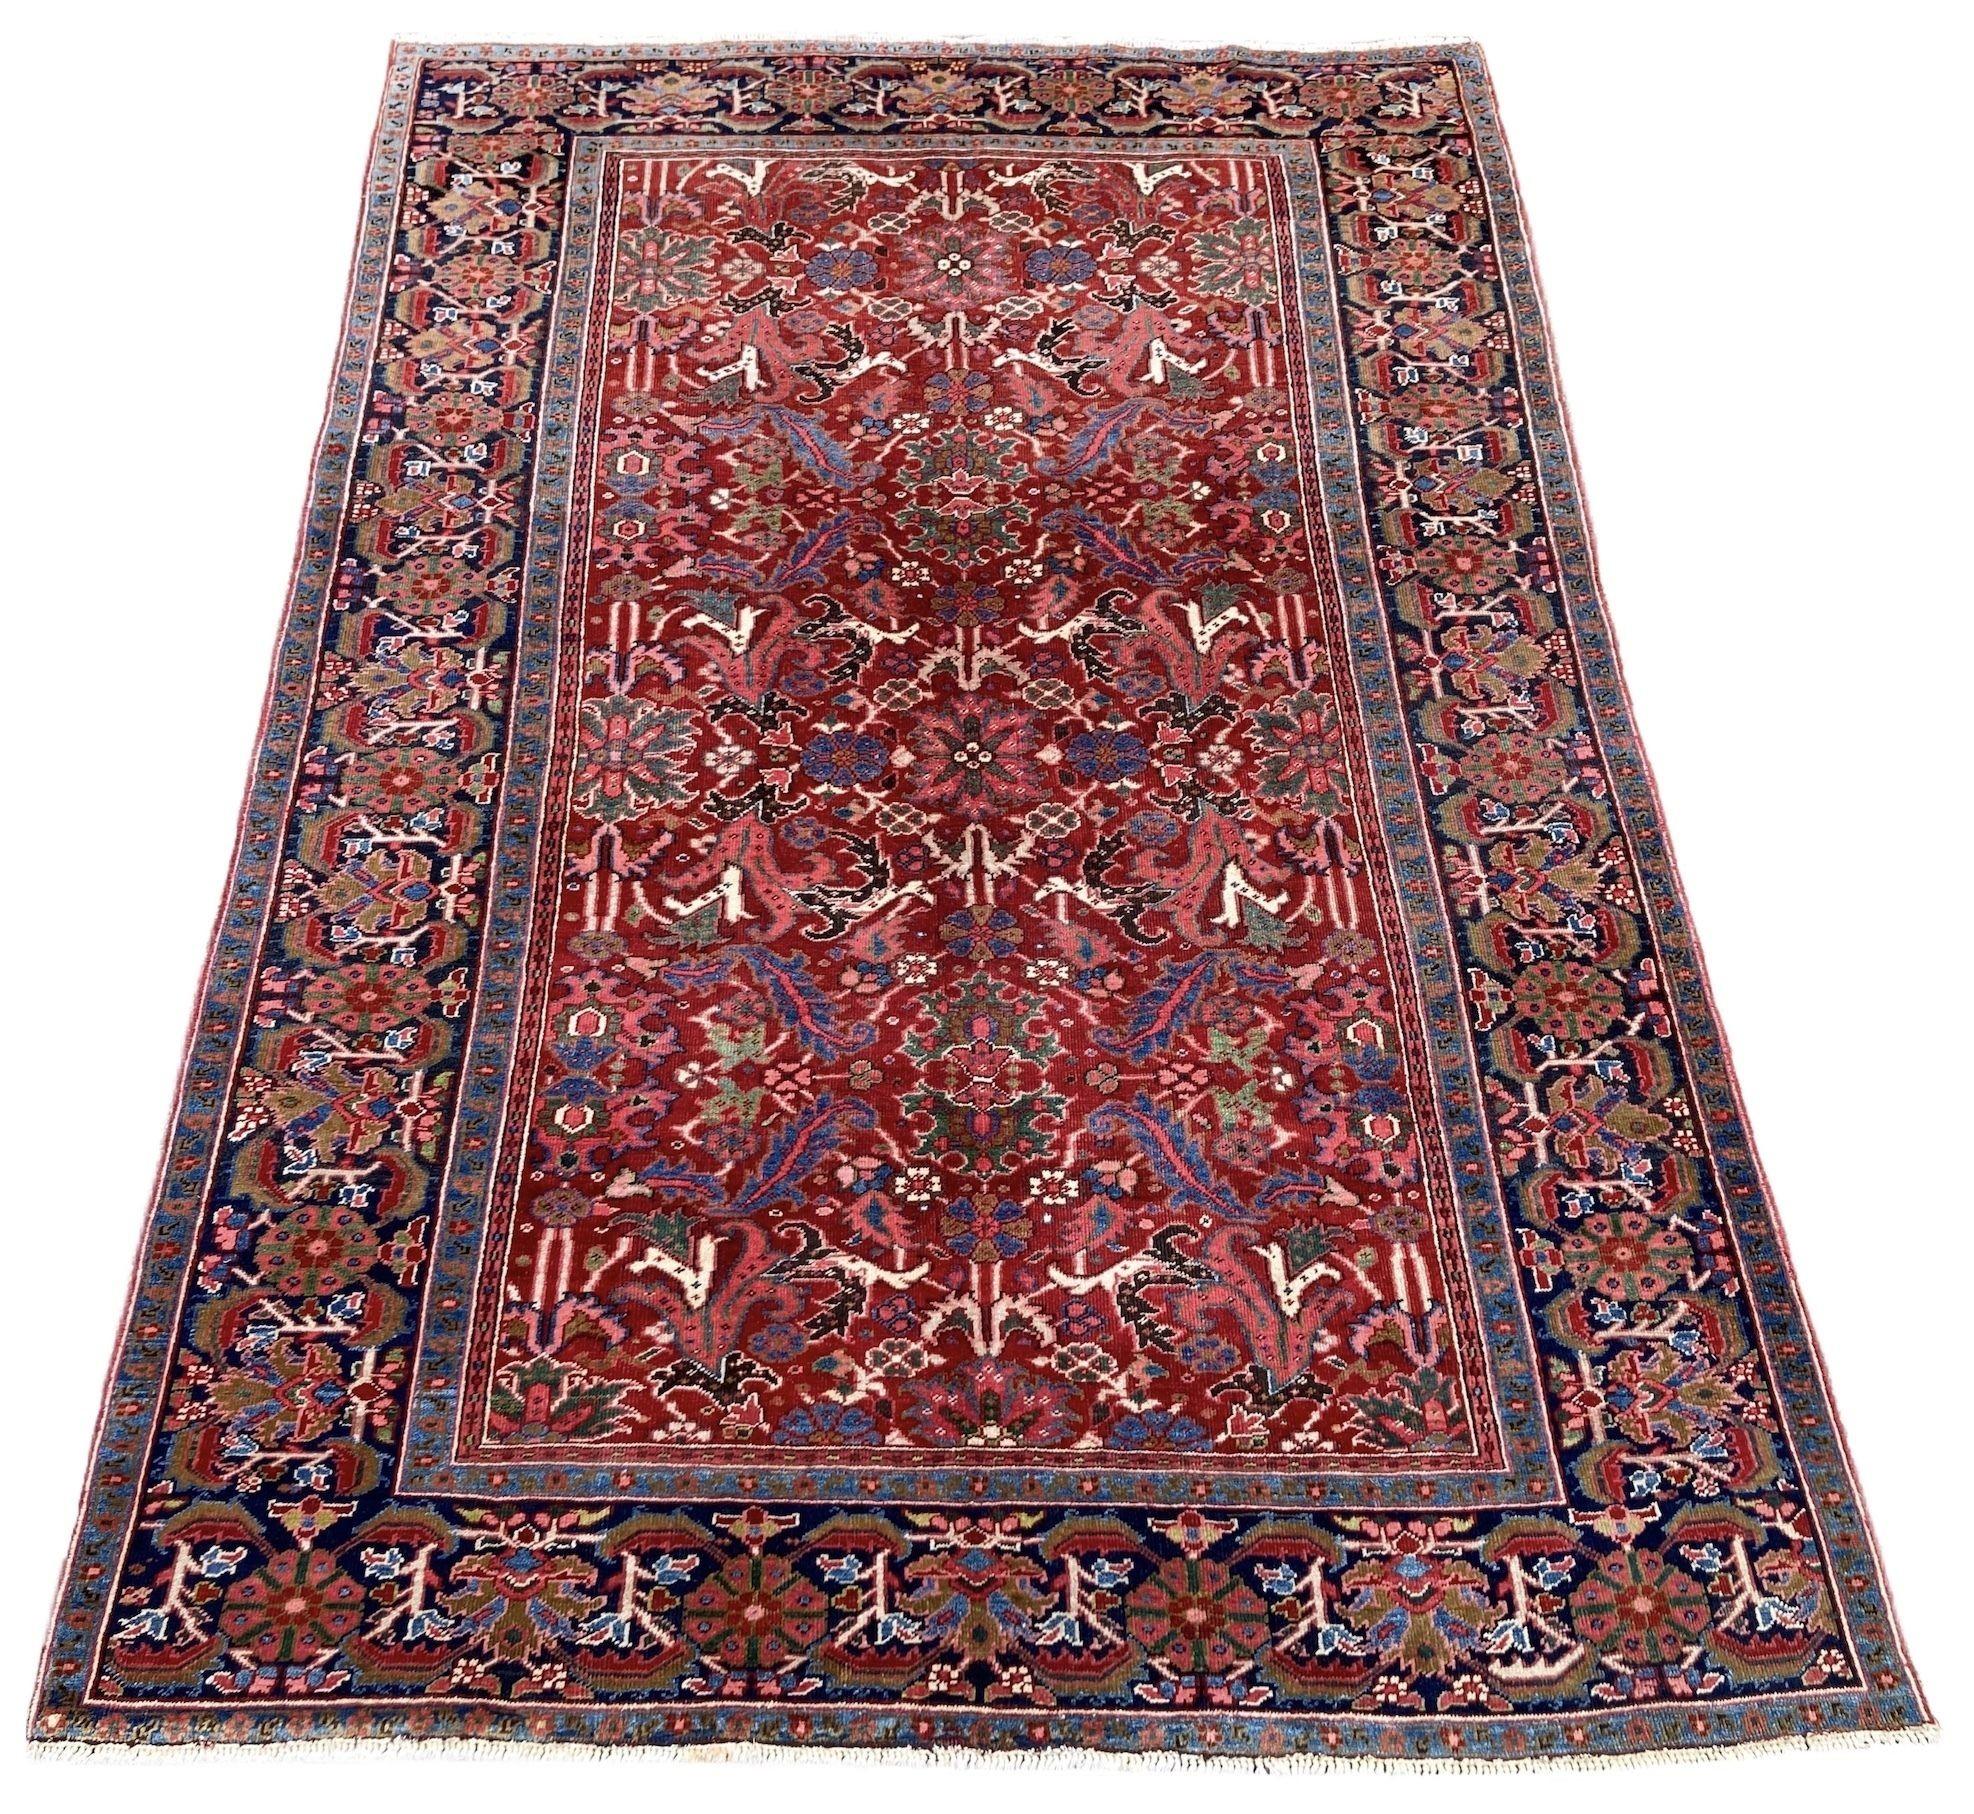 A beautiful antique Heriz carpet, handwoven circa 1920 with an attractive all over design of flowers and shrubs on a brick red field and deep indigo border. A highly decorative carpet with great secondary colours.
Size: 3.29m x 2.25m (10ft 10in x